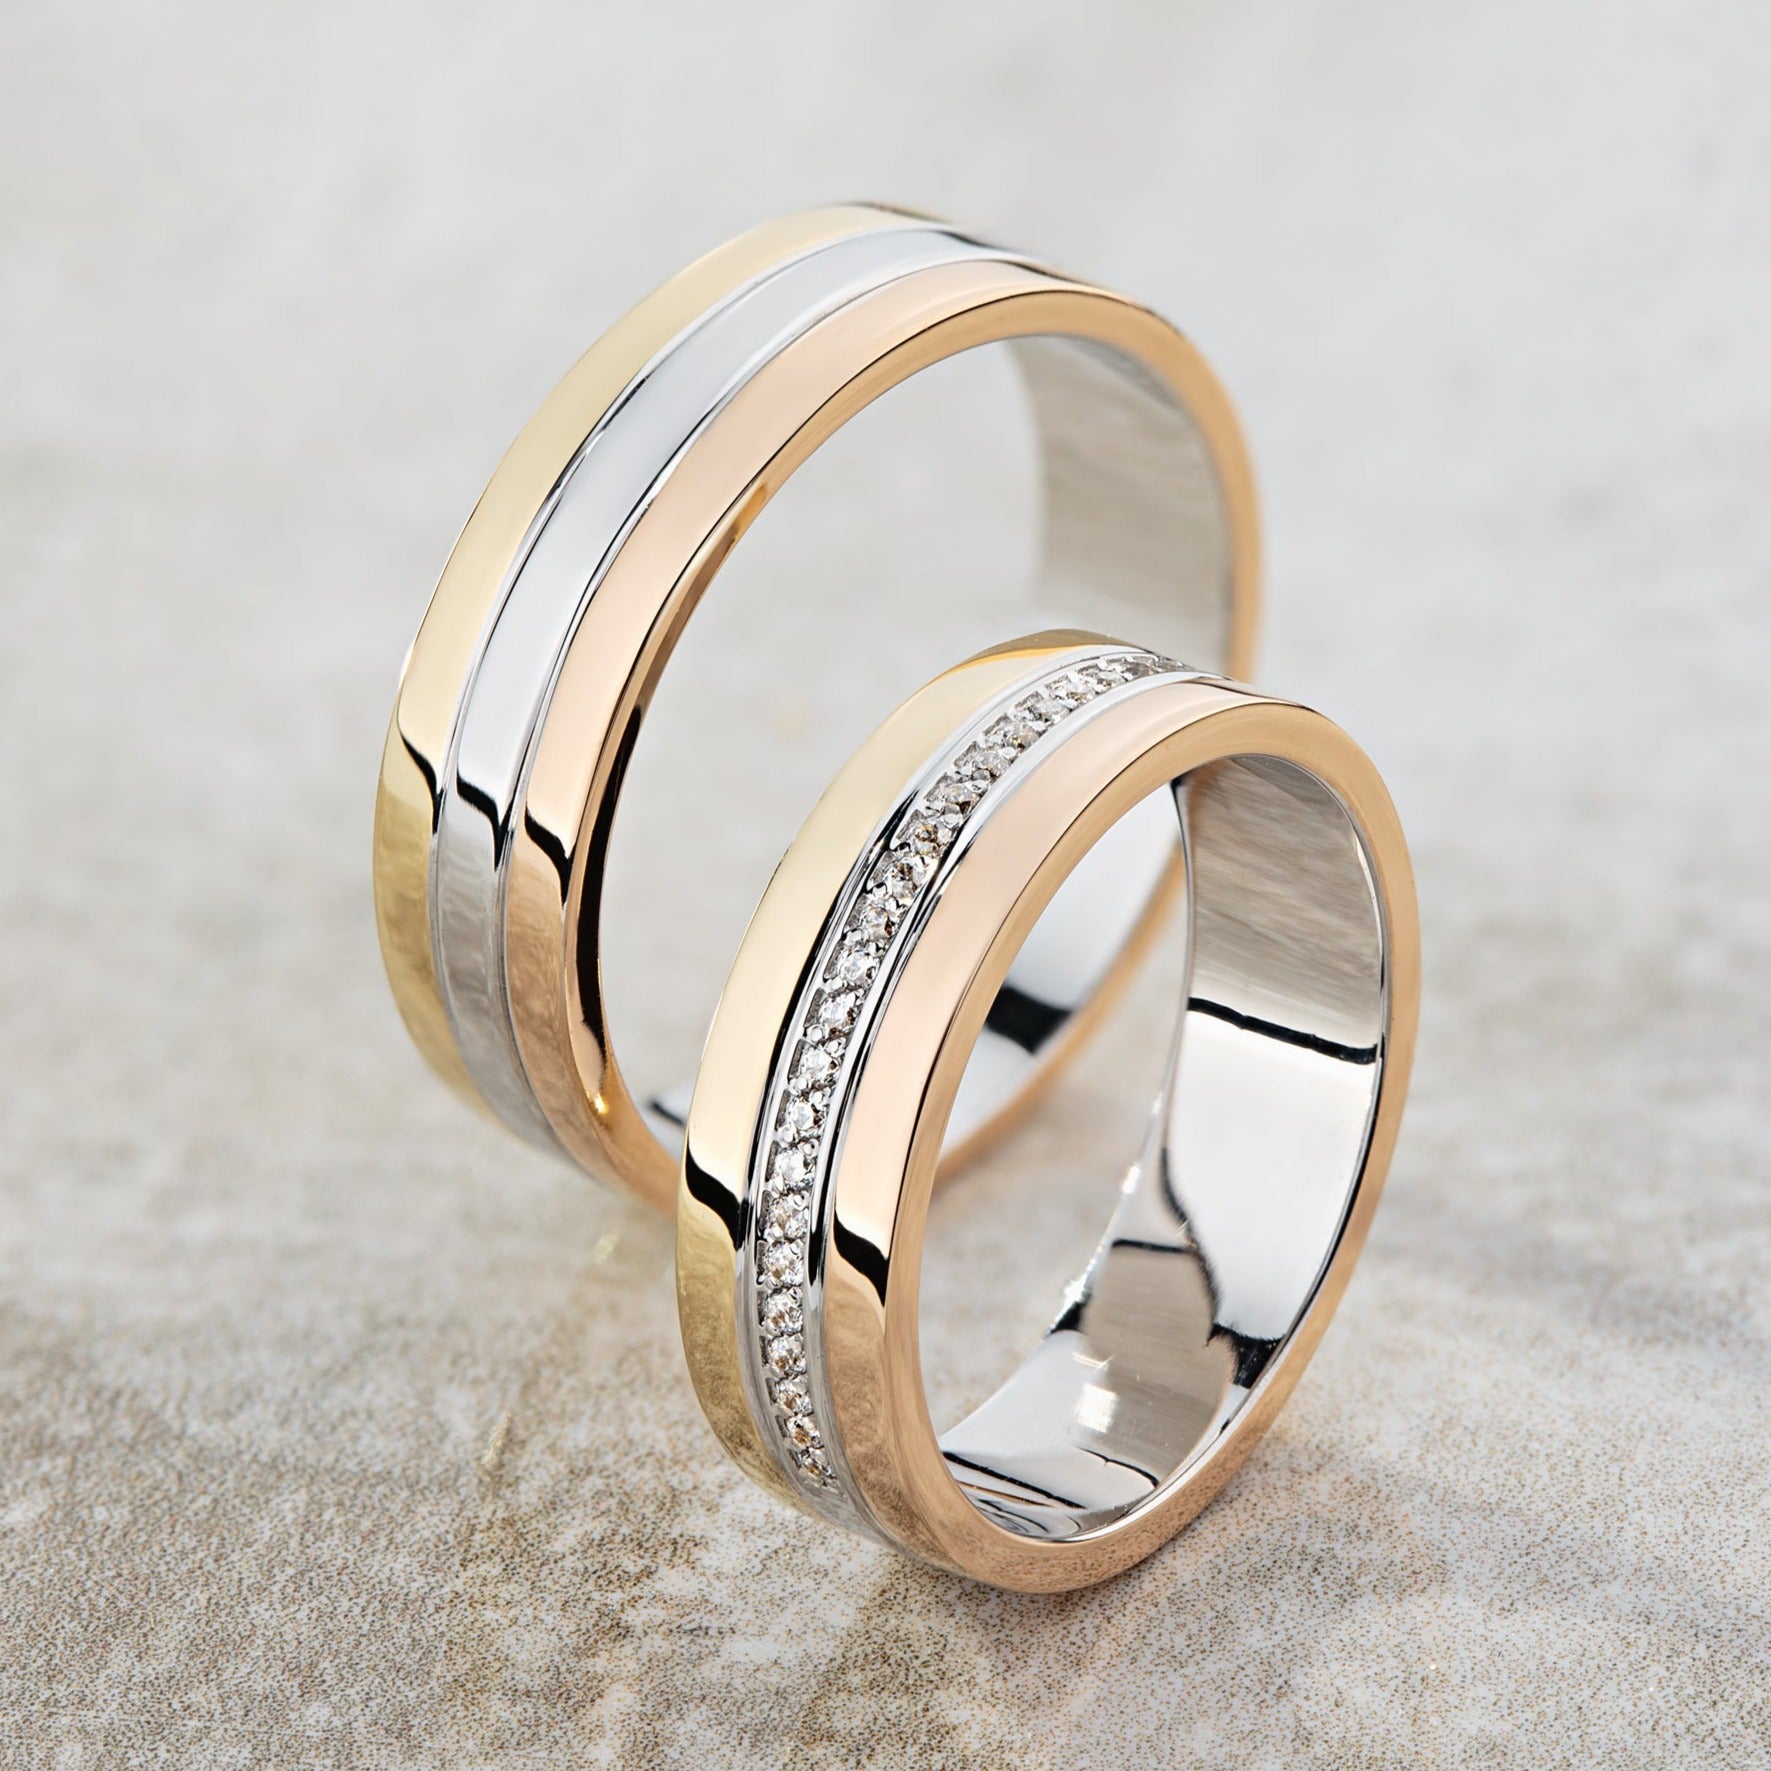 Tricolor Wedding Bands. His and hers wedding bands set made of three colors of gold. Couple rings set. Tri-tone wedding rings. Unique bands. Gold wedding rings set. Solid gold wedding bands